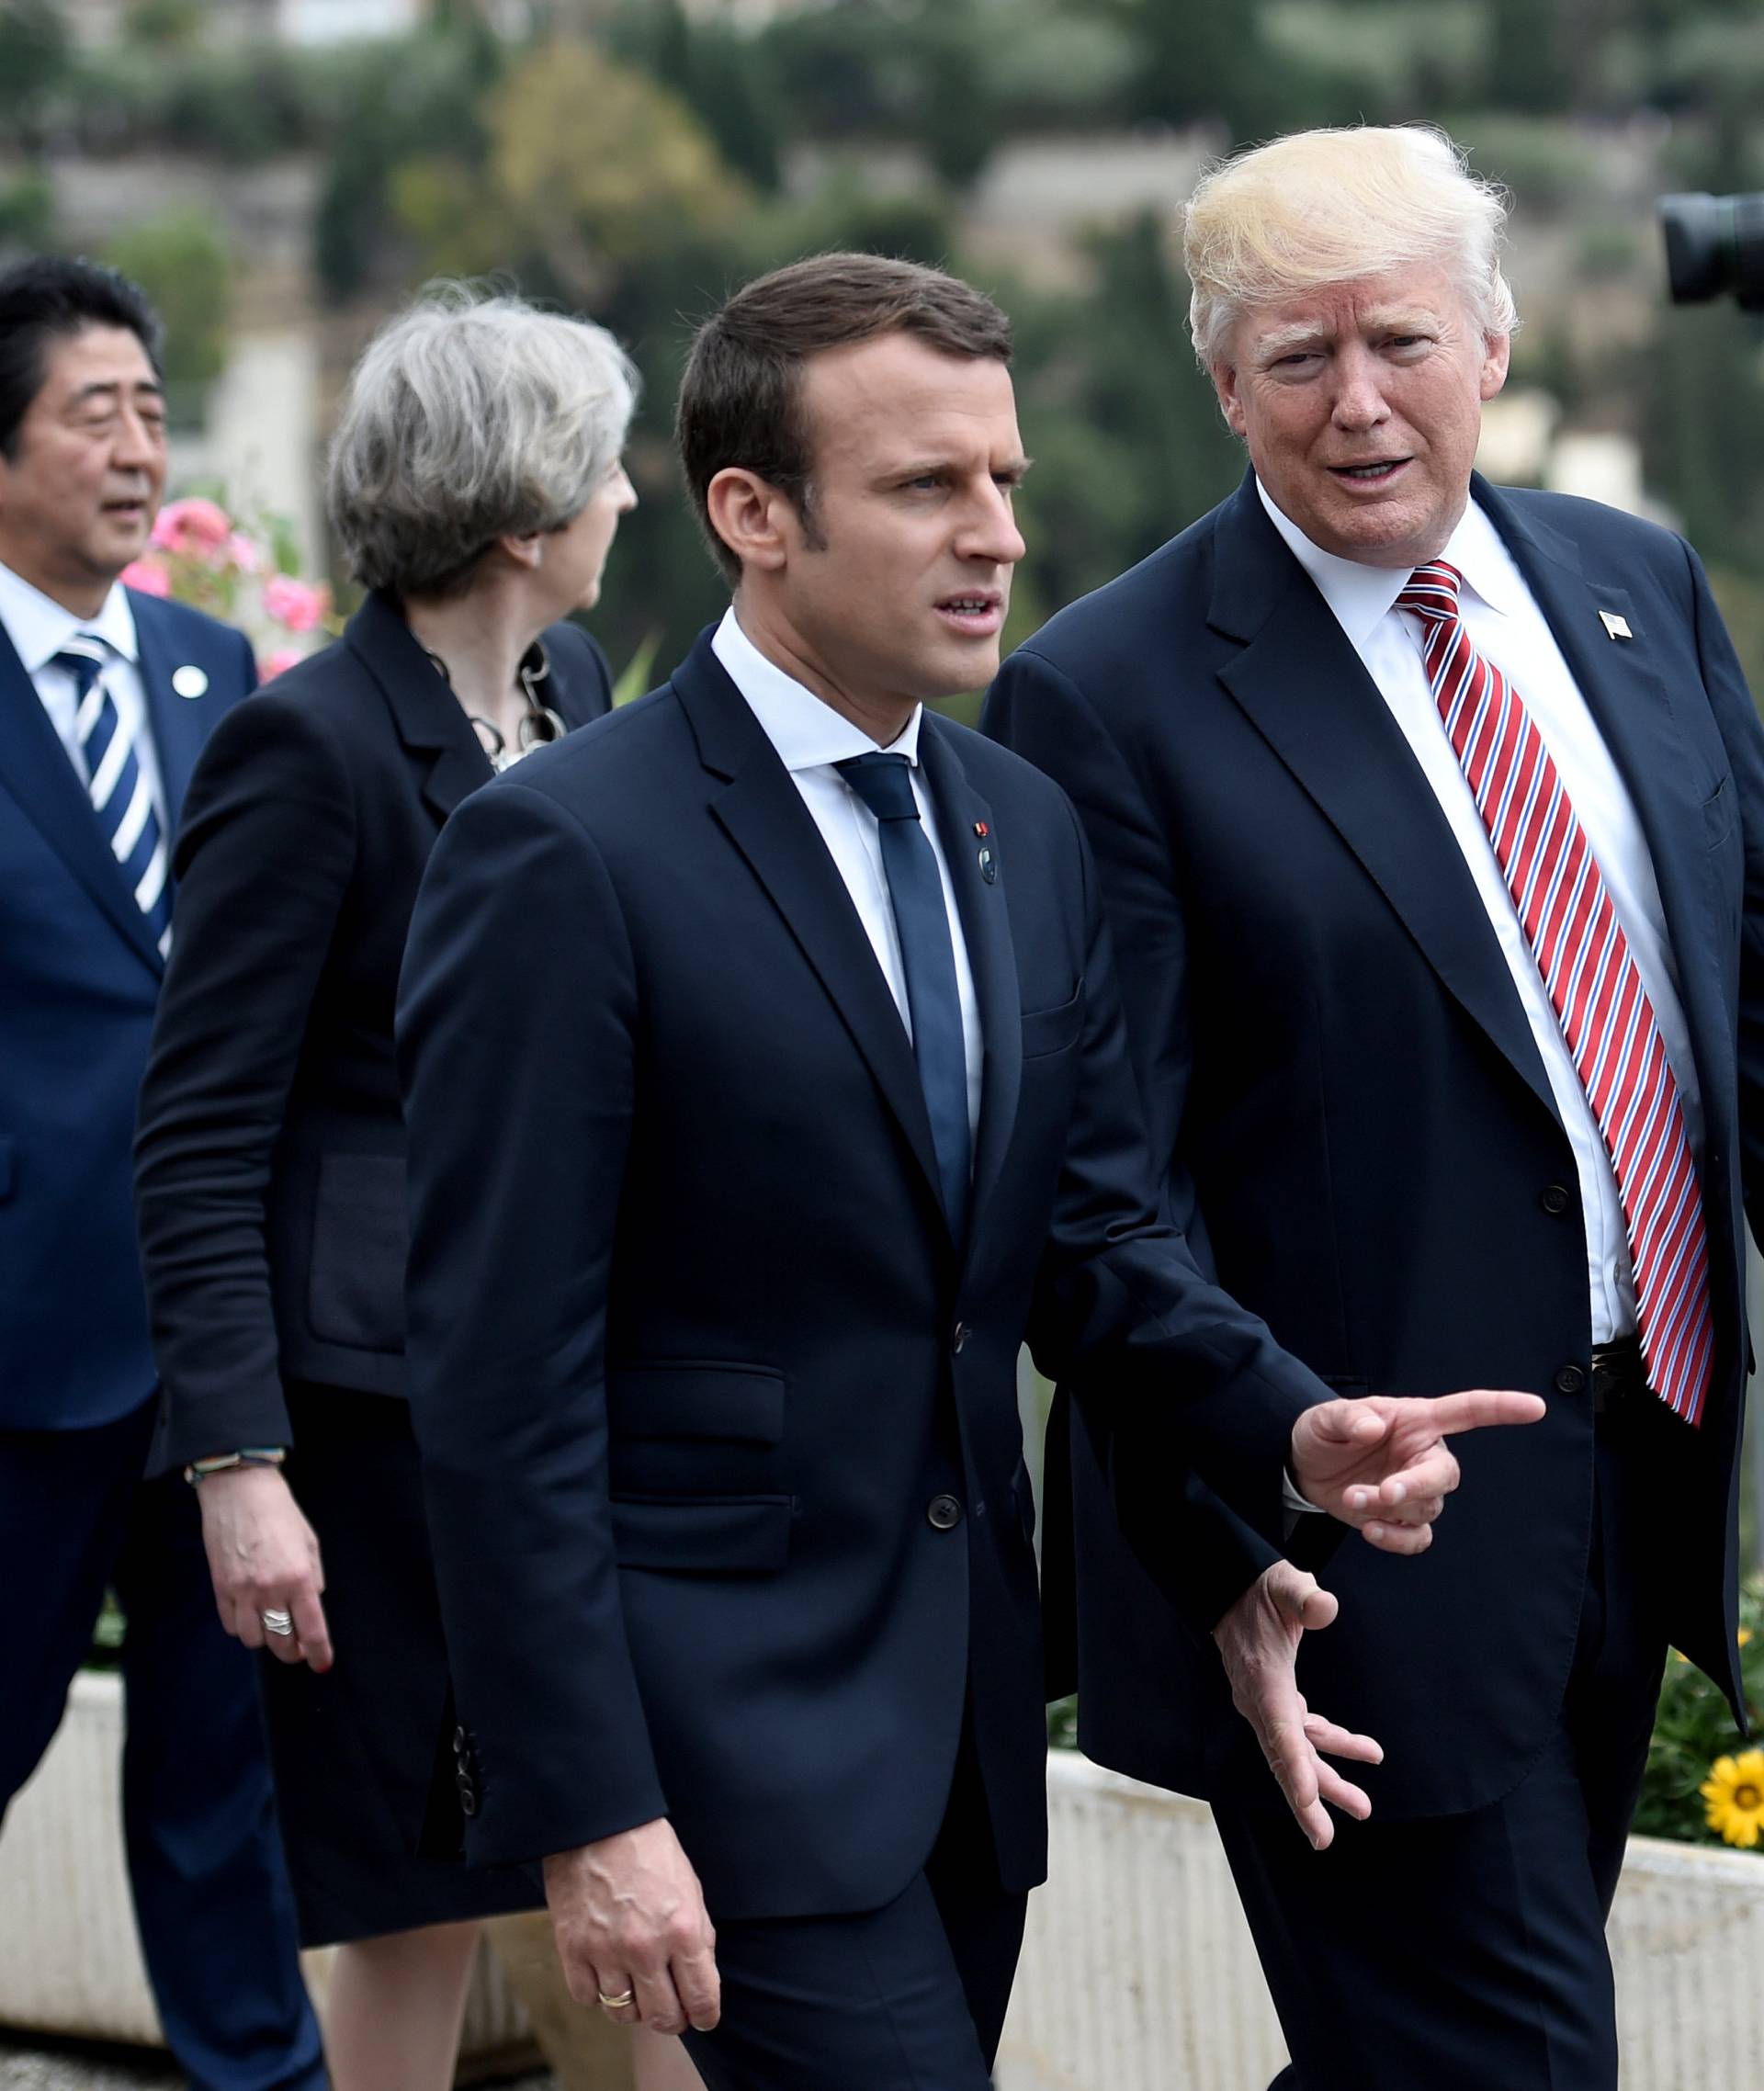 U.S. President Donald Trump talks with French President Emmanuel Macron as they attend the G7 Summit in Taormina, Sicily